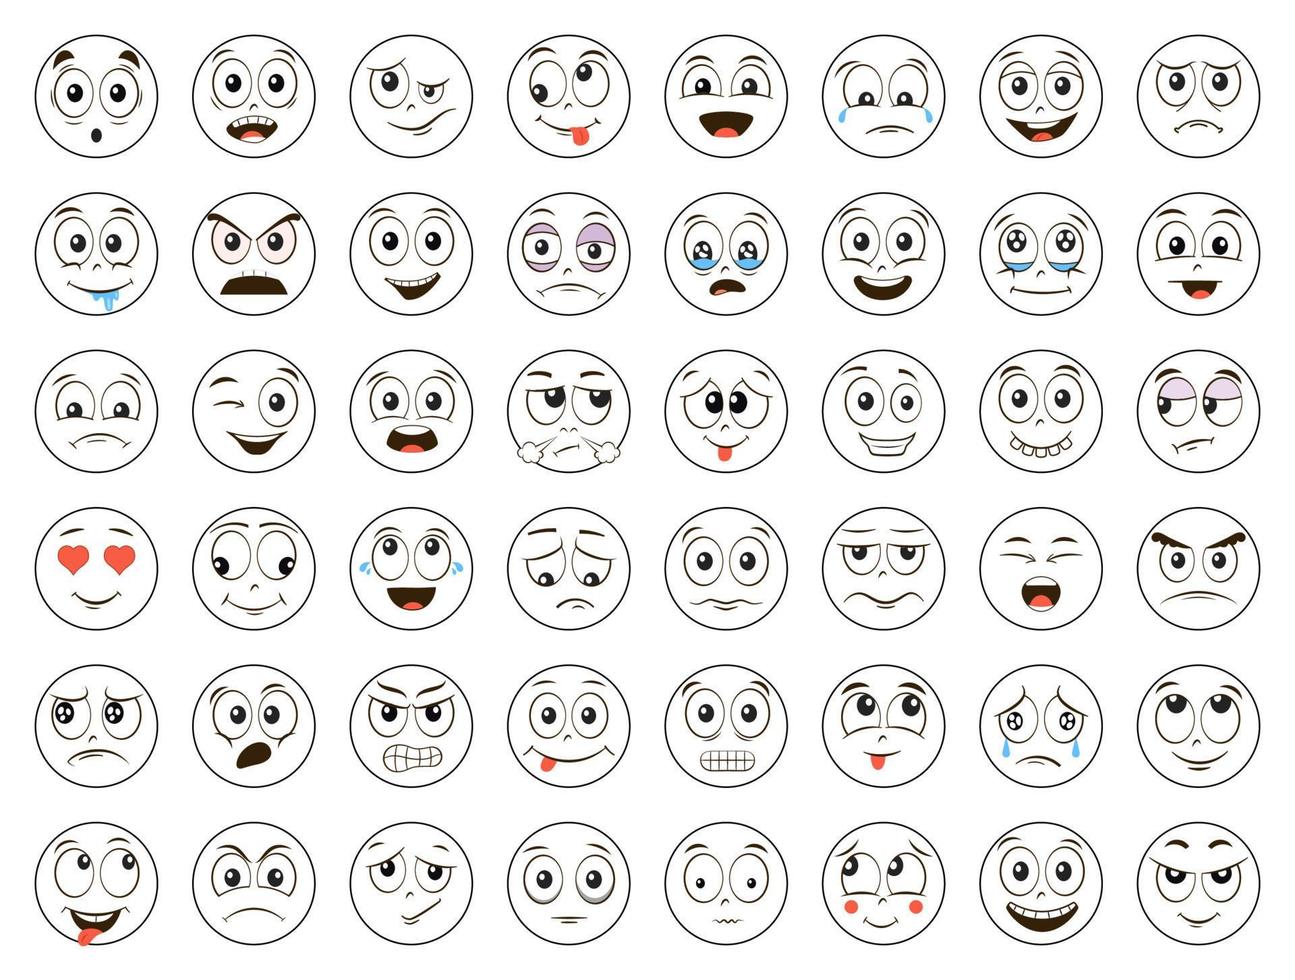 Set of Emoticons. Emoji. Cartoon faces set. Angry, laughing, smiling, crying, scared and other expressions. Smile icons. Isolated vector illustration on white background